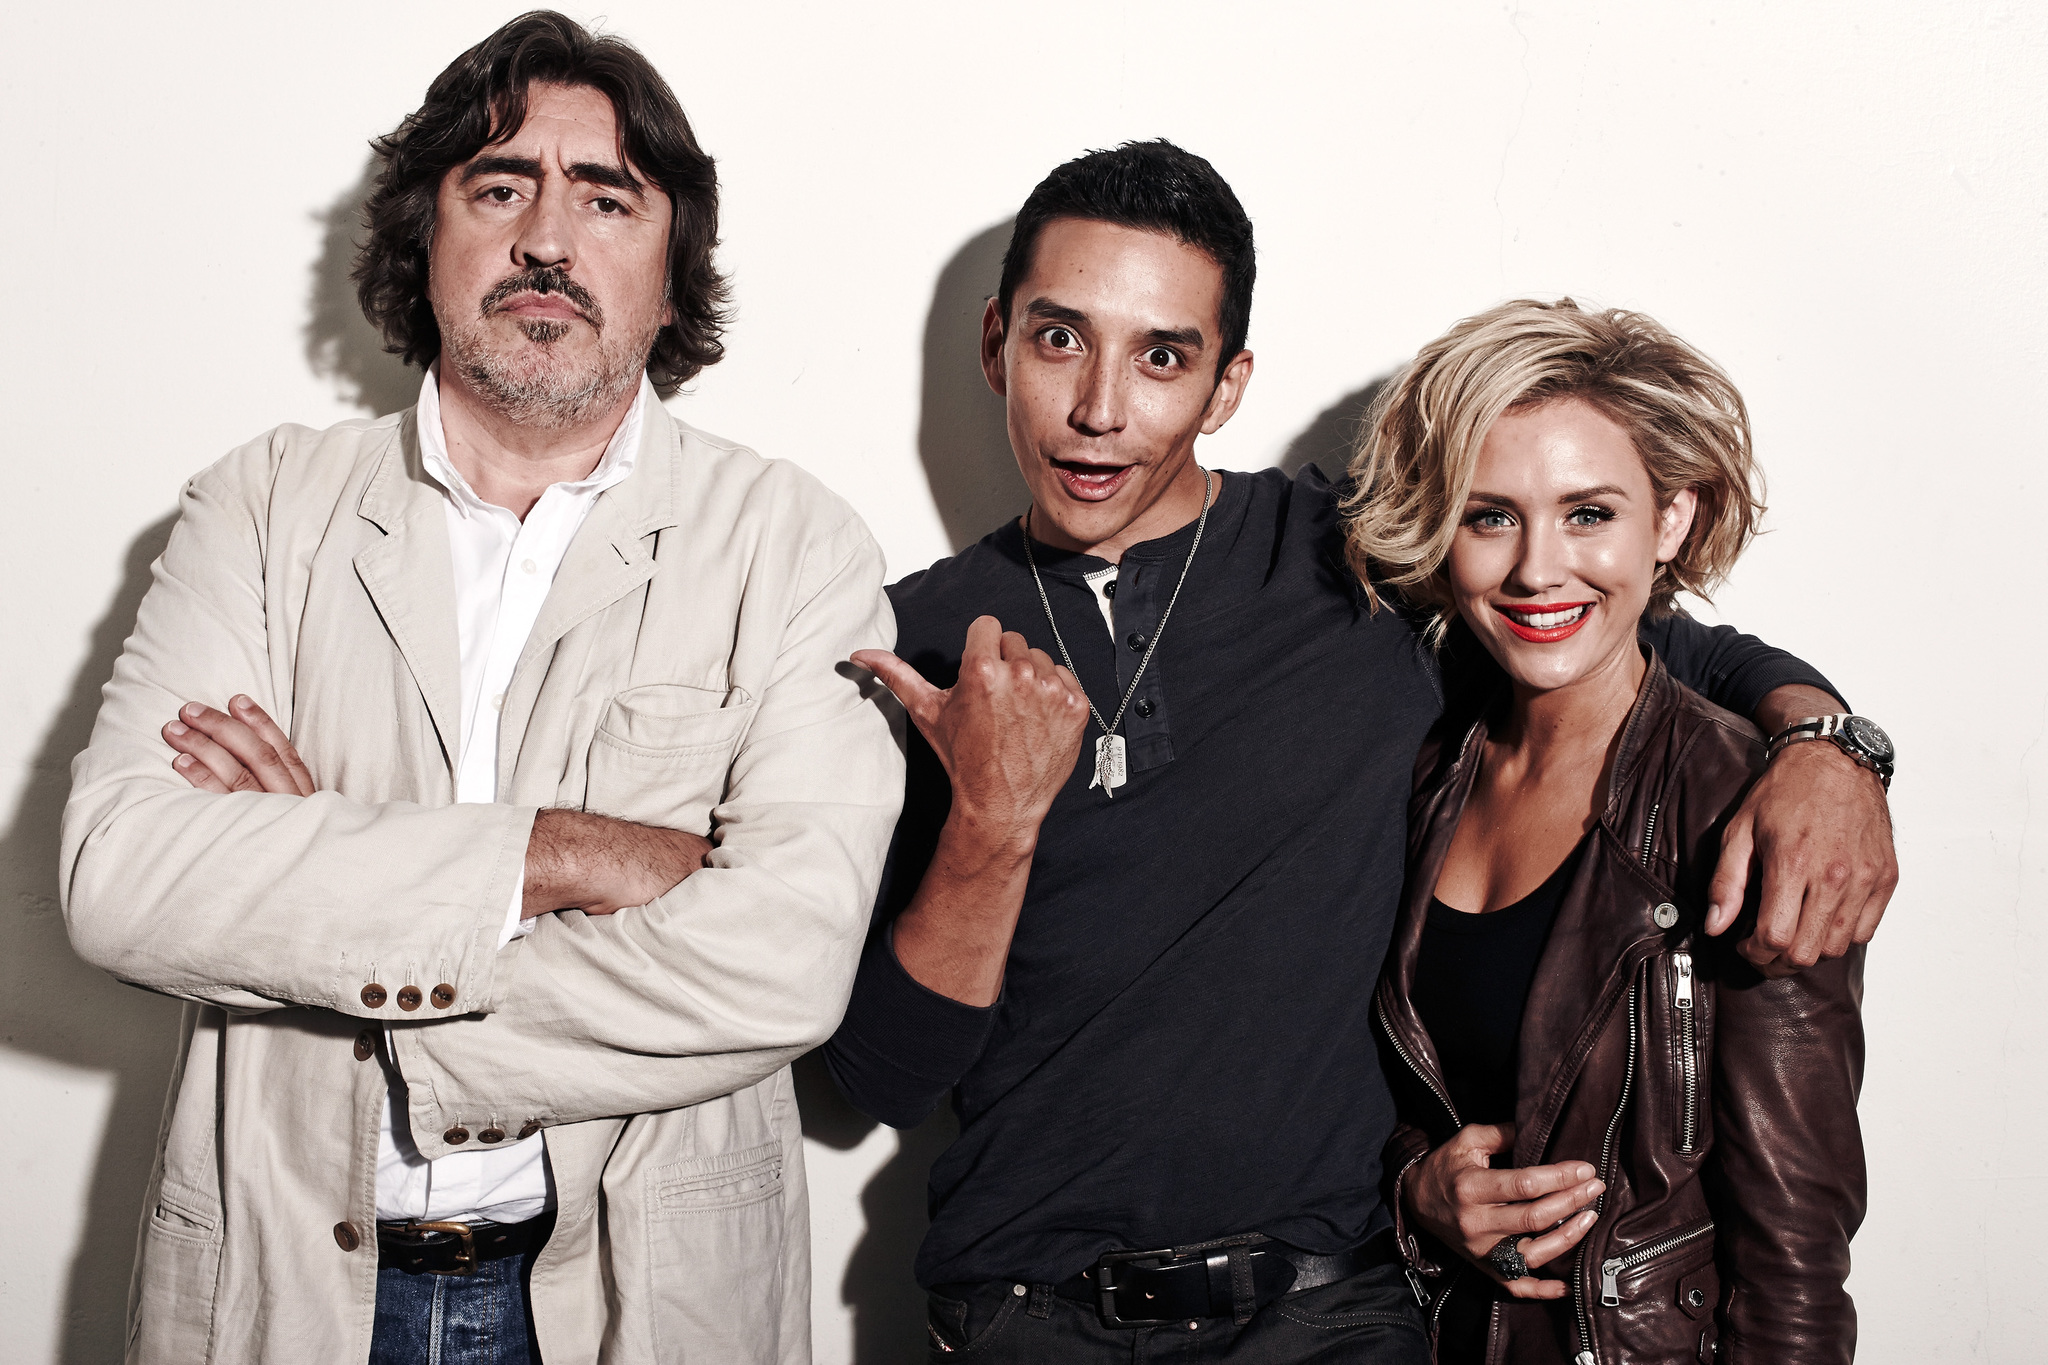 Alfred Molina, Gabriel Luna and Nicky Whelan from 'Matador' pose for a portrait during the 2014 Television Critics Association Summer Tour at The Beverly Hilton Hotel on July 10, 2014 in Beverly Hills, California.